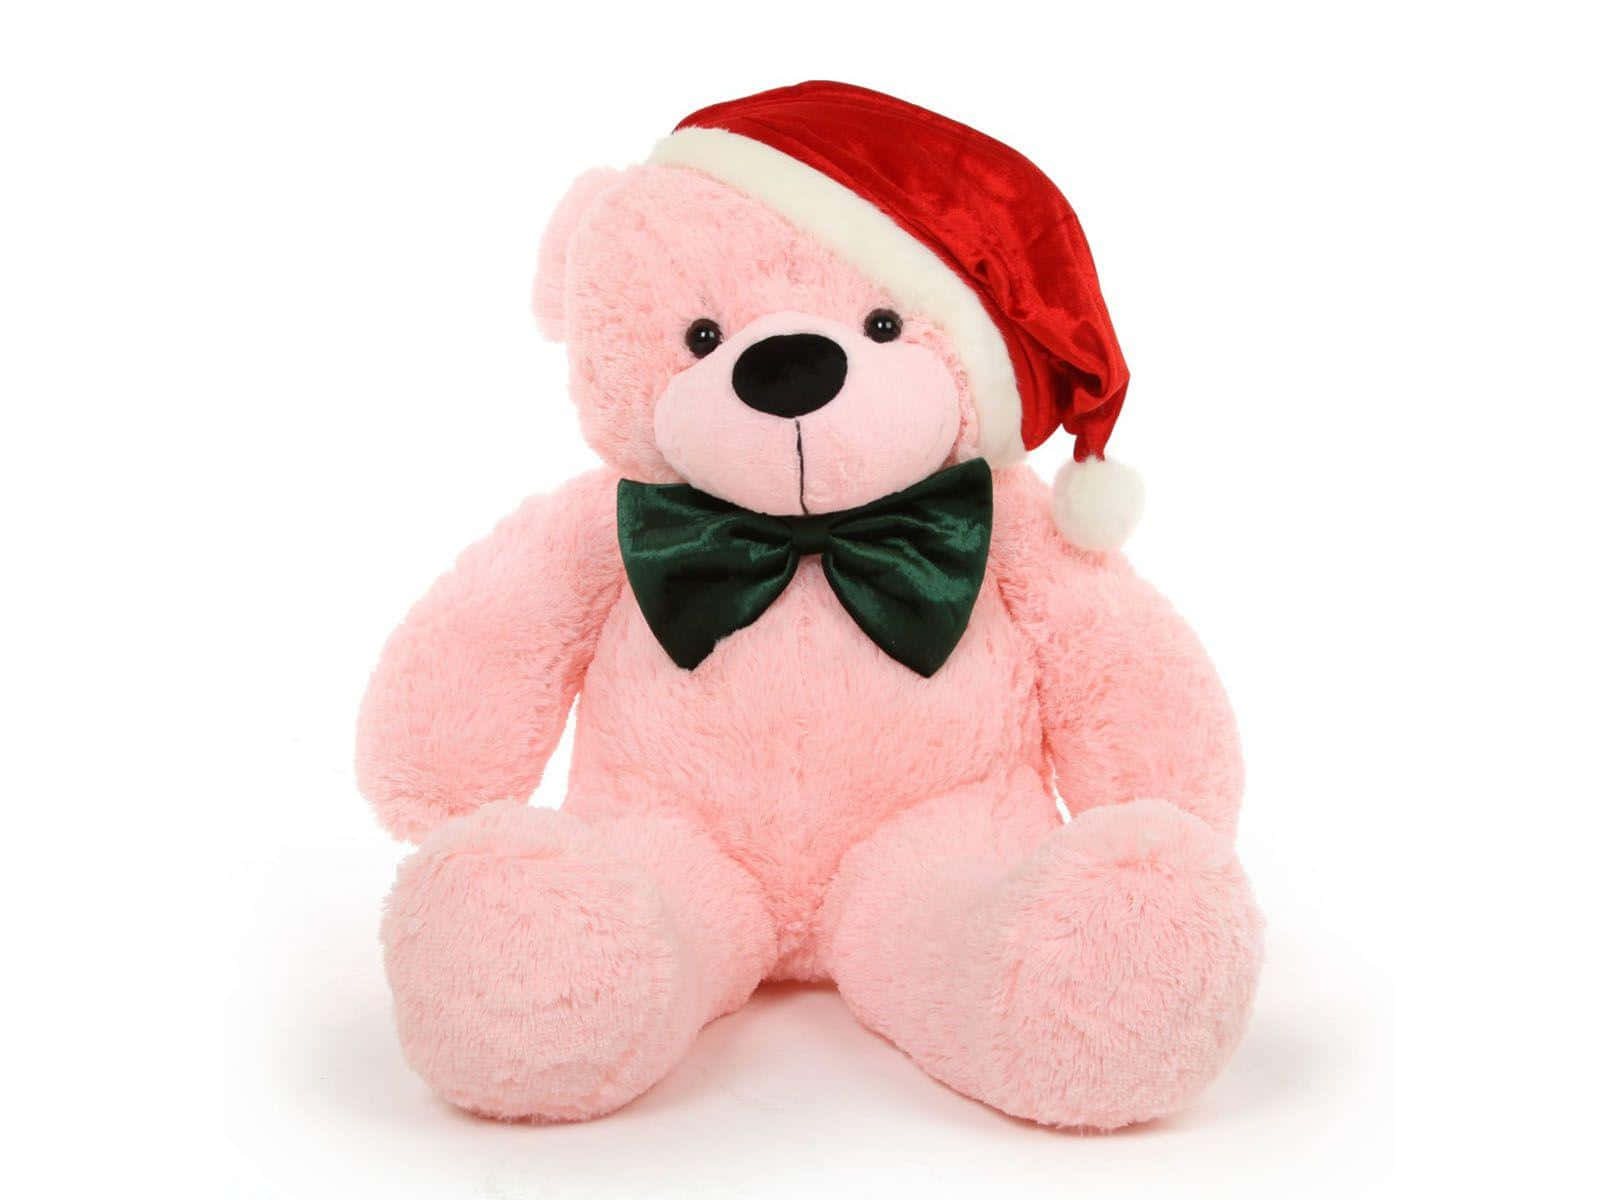 Adorable Pink Teddy Bear Festively Adorned For Christmas Background